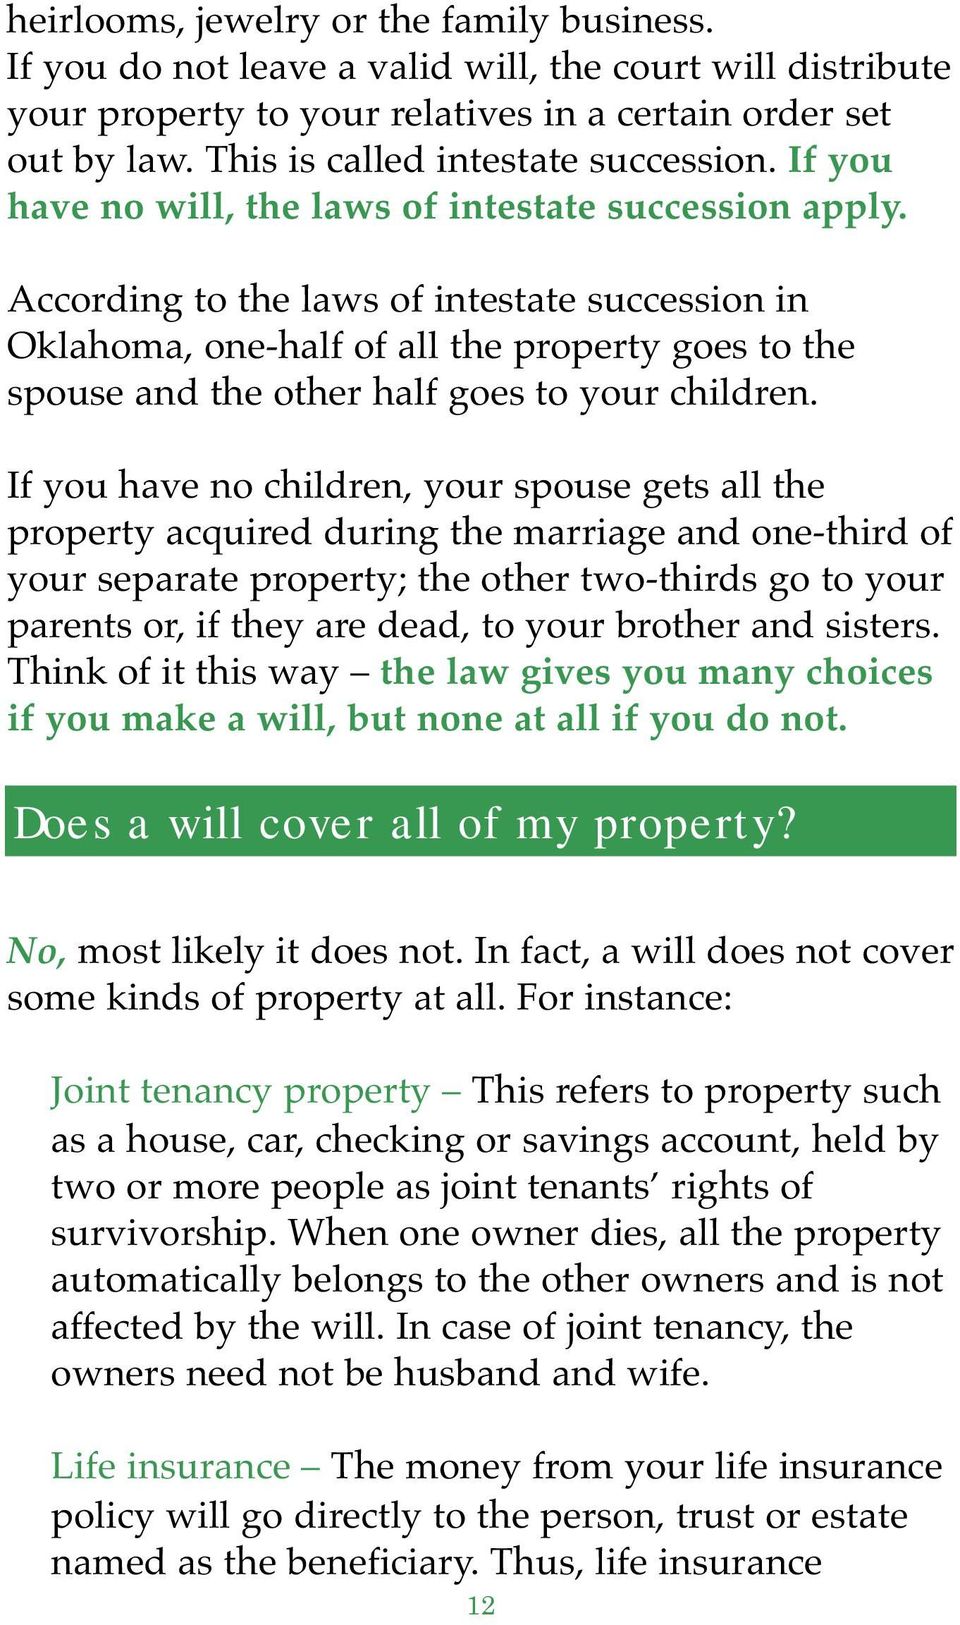 According to the laws of intestate succession in Oklahoma, one half of all the property goes to the spouse and the other half goes to your children.